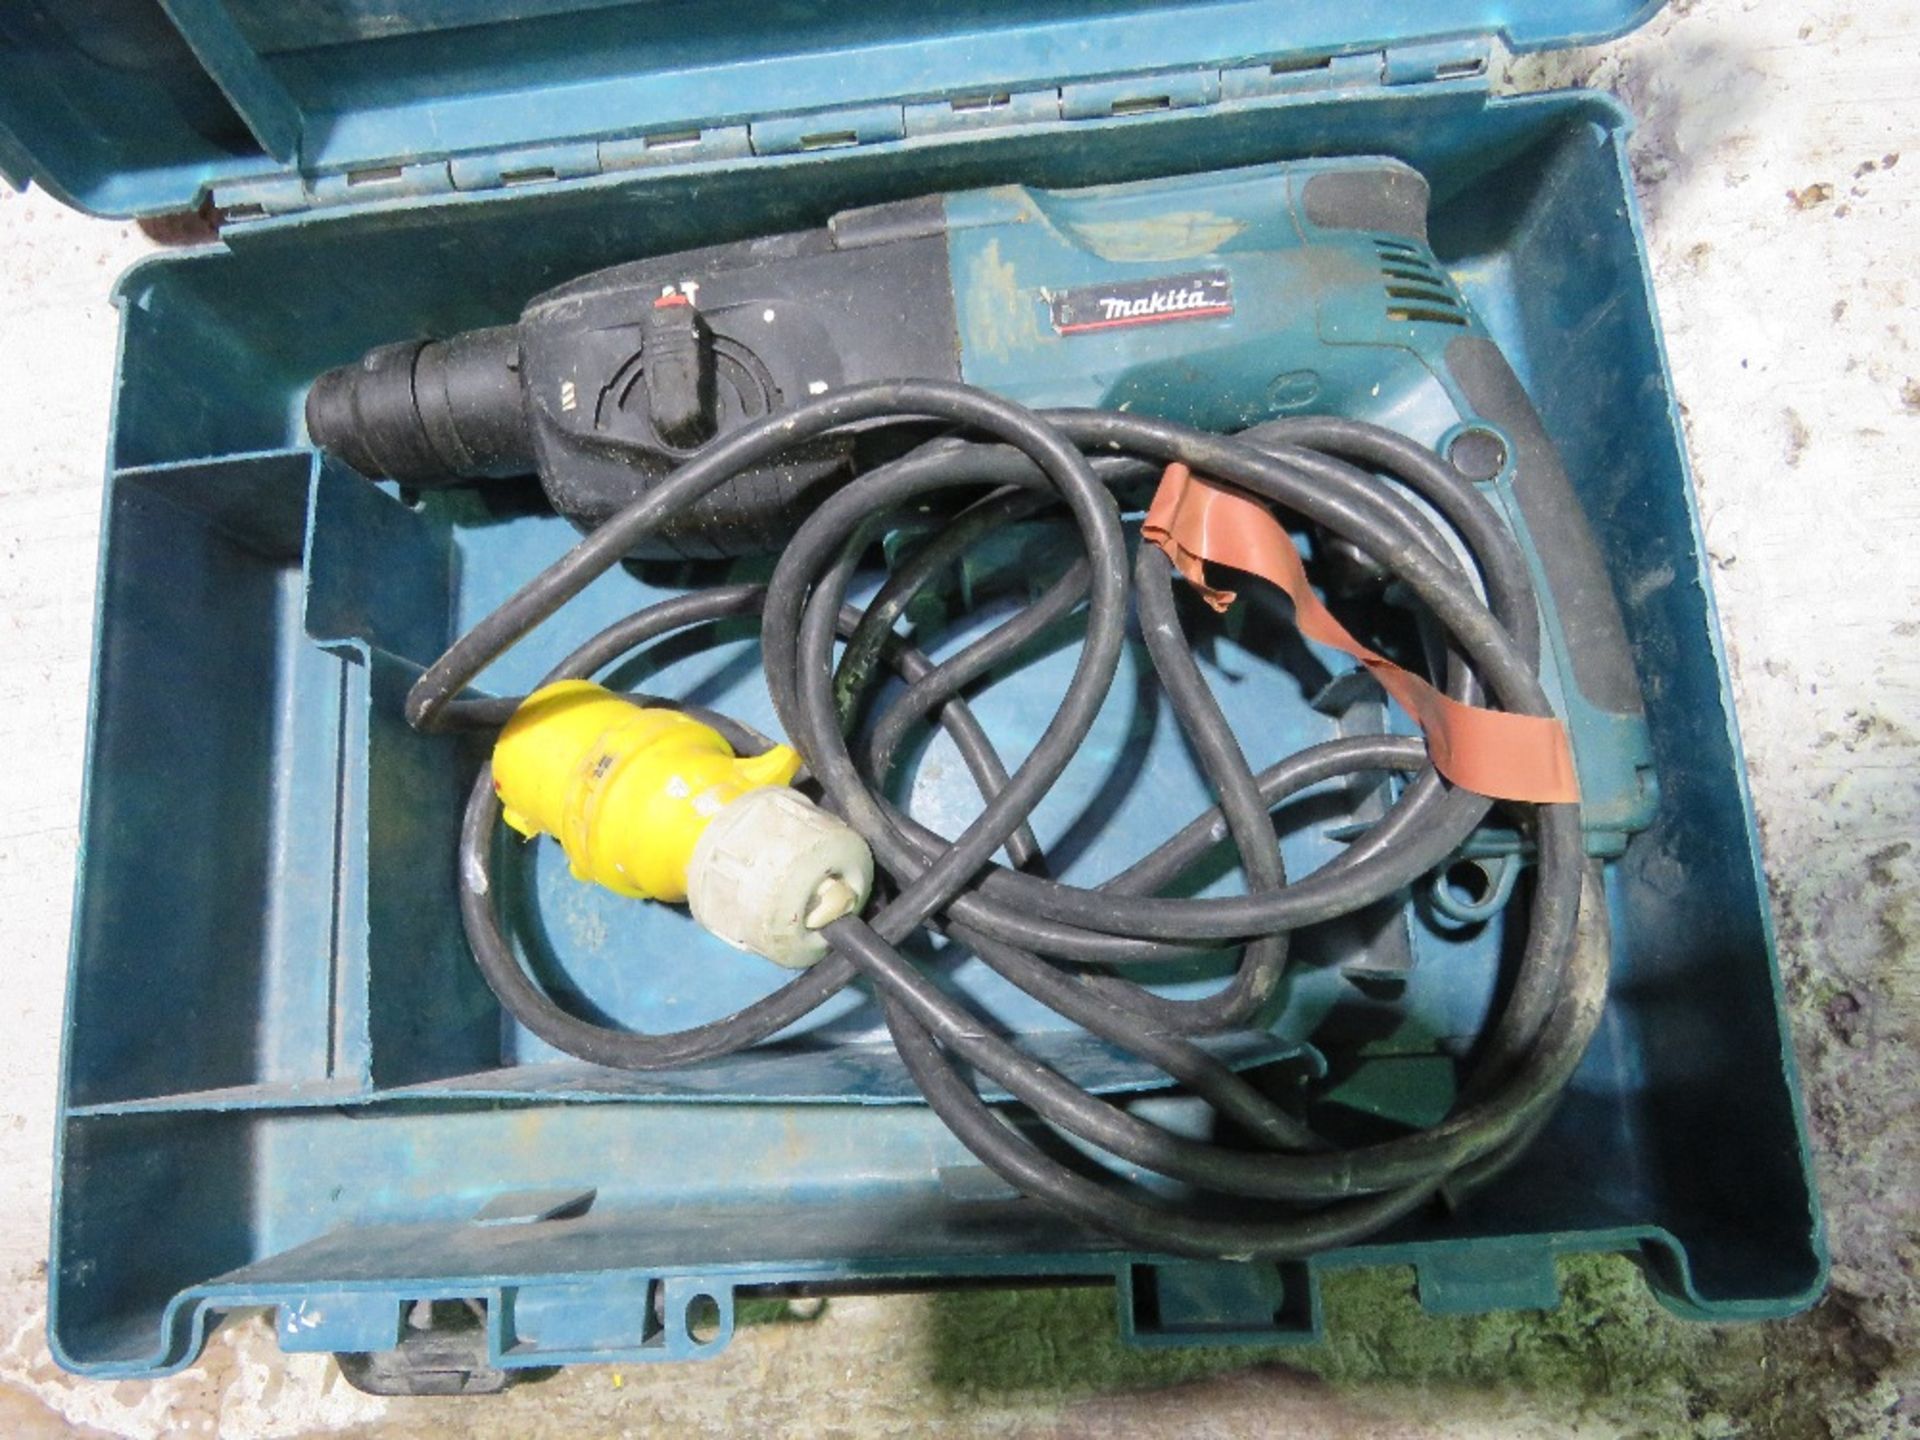 4NO 110VOLT POWERED DRILLS.....THIS LOT IS SOLD UNDER THE AUCTIONEERS MARGIN SCHEME, THEREFORE NO VA - Image 7 of 7